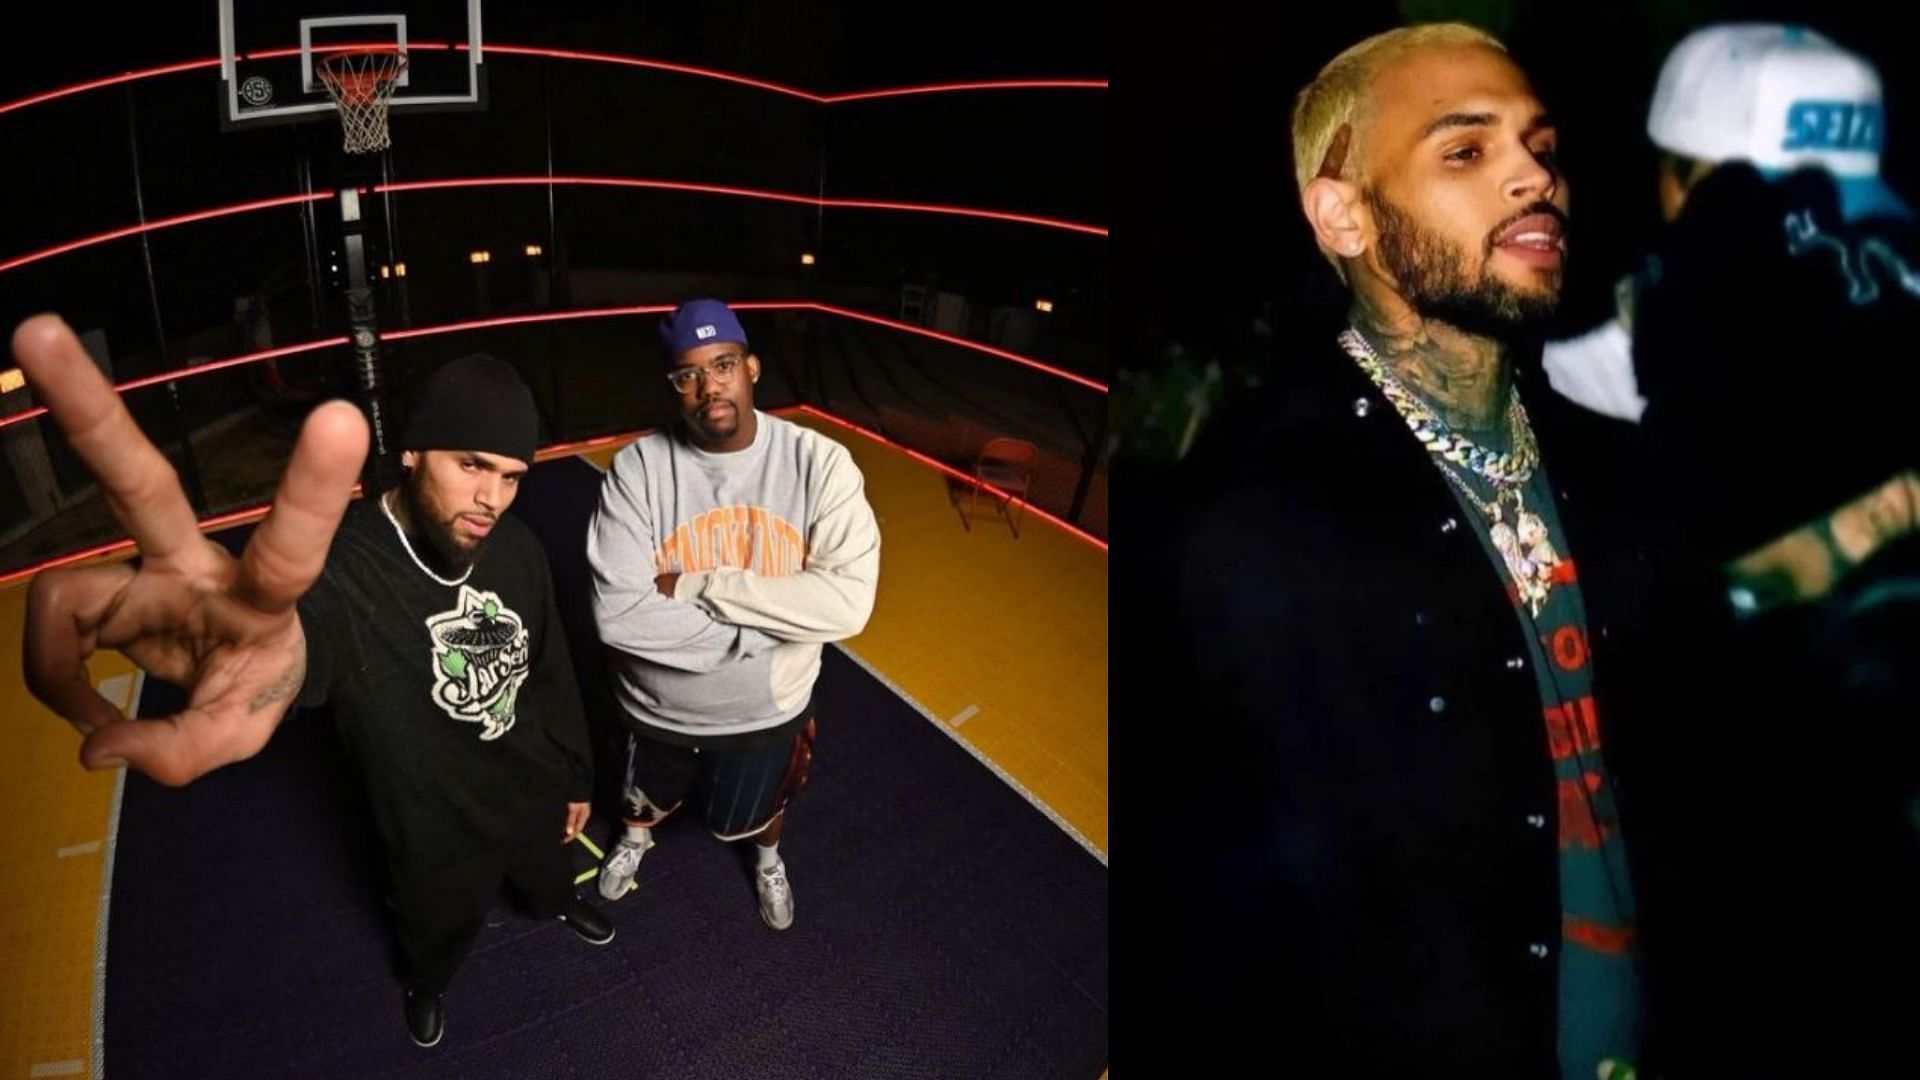 Chris Brown x John Dean came together for a new NFT collection (Image via Sportskeeda)